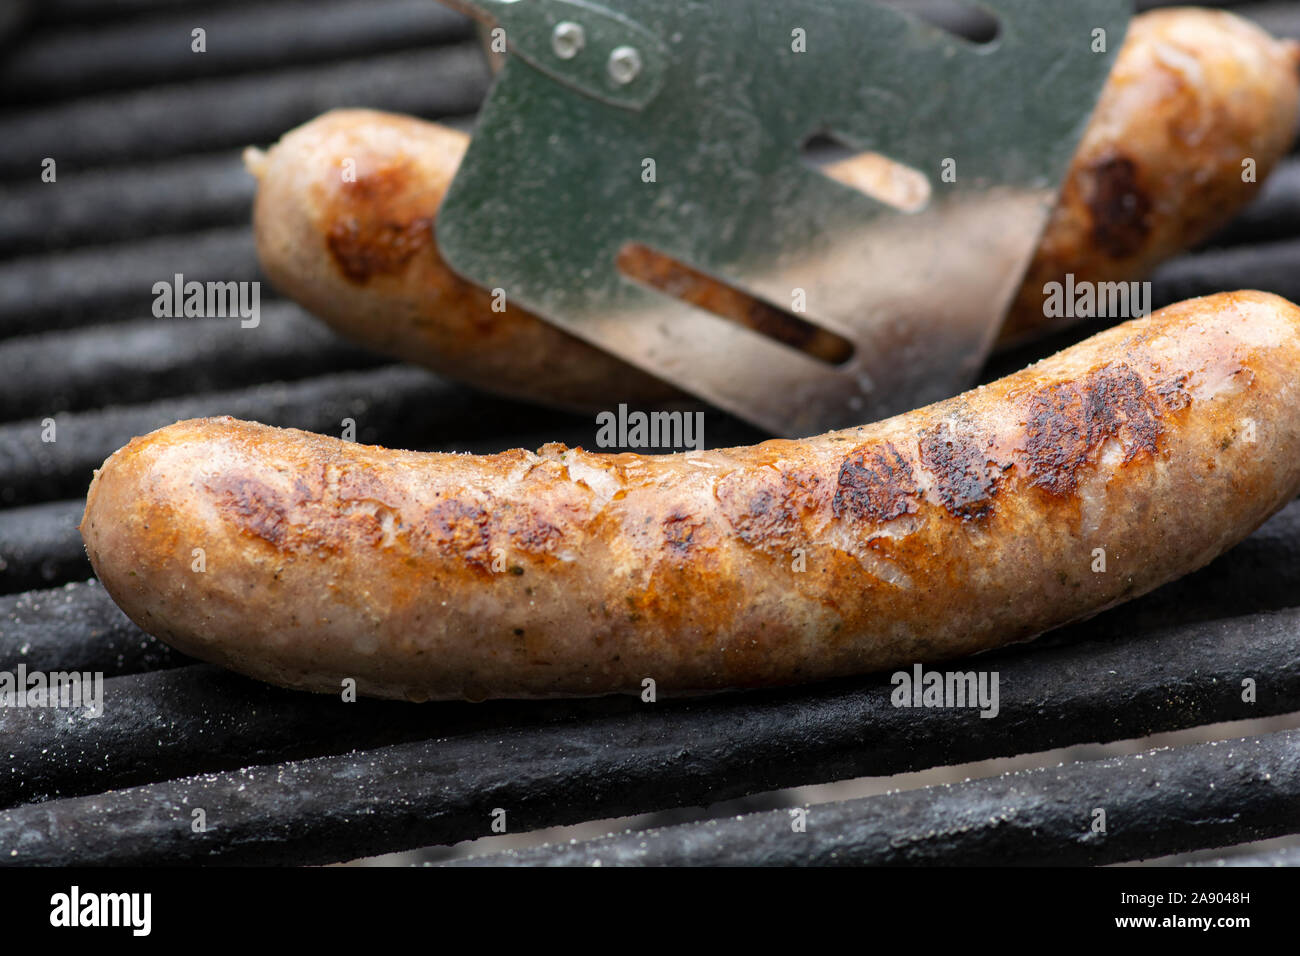 Savory brats cooking on an outdoor iron grill. Stock Photo